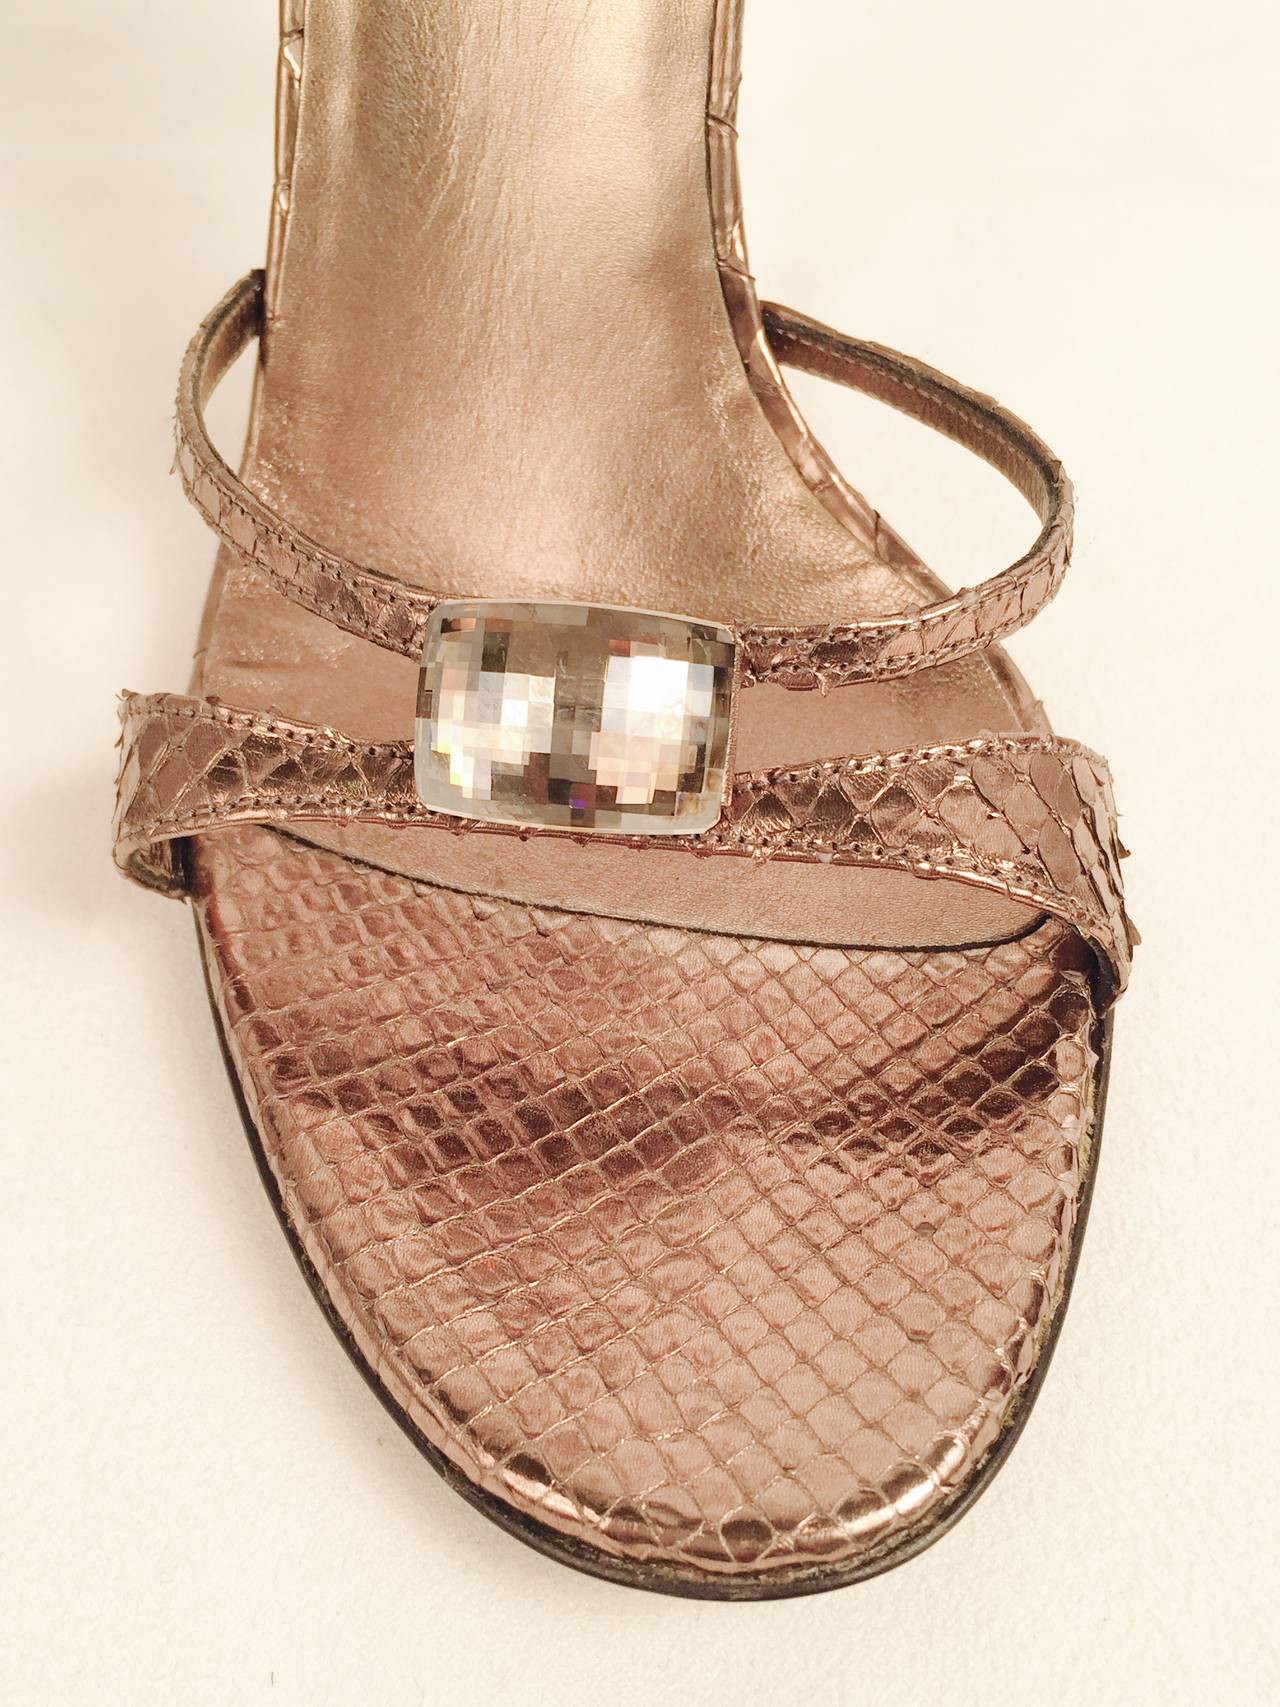 Gucci Mettalic Snakeskin High Heel Strappy Sandals In Excellent Condition For Sale In Palm Beach, FL